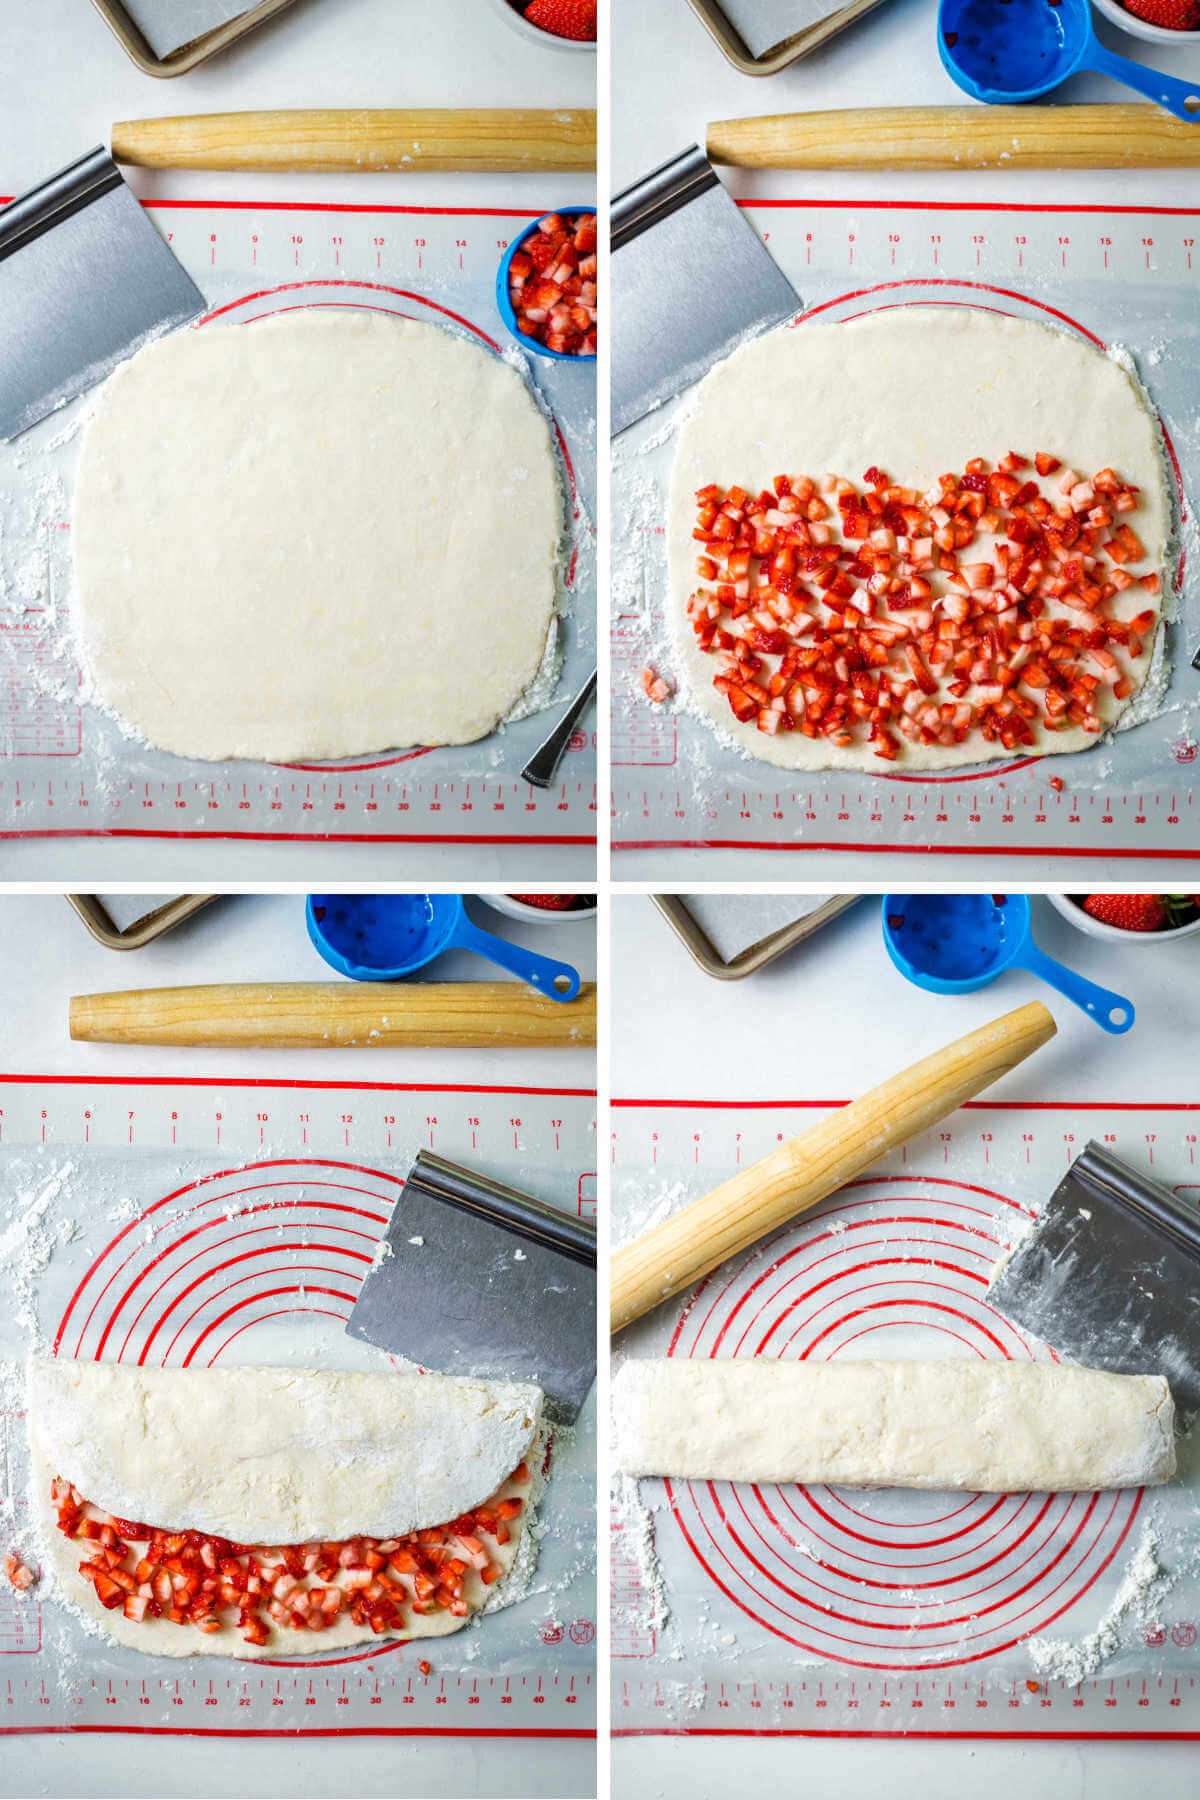 process steps for shaping the dough for strawberry scones; adding diced berries on top of dough and folding it over to form a log.